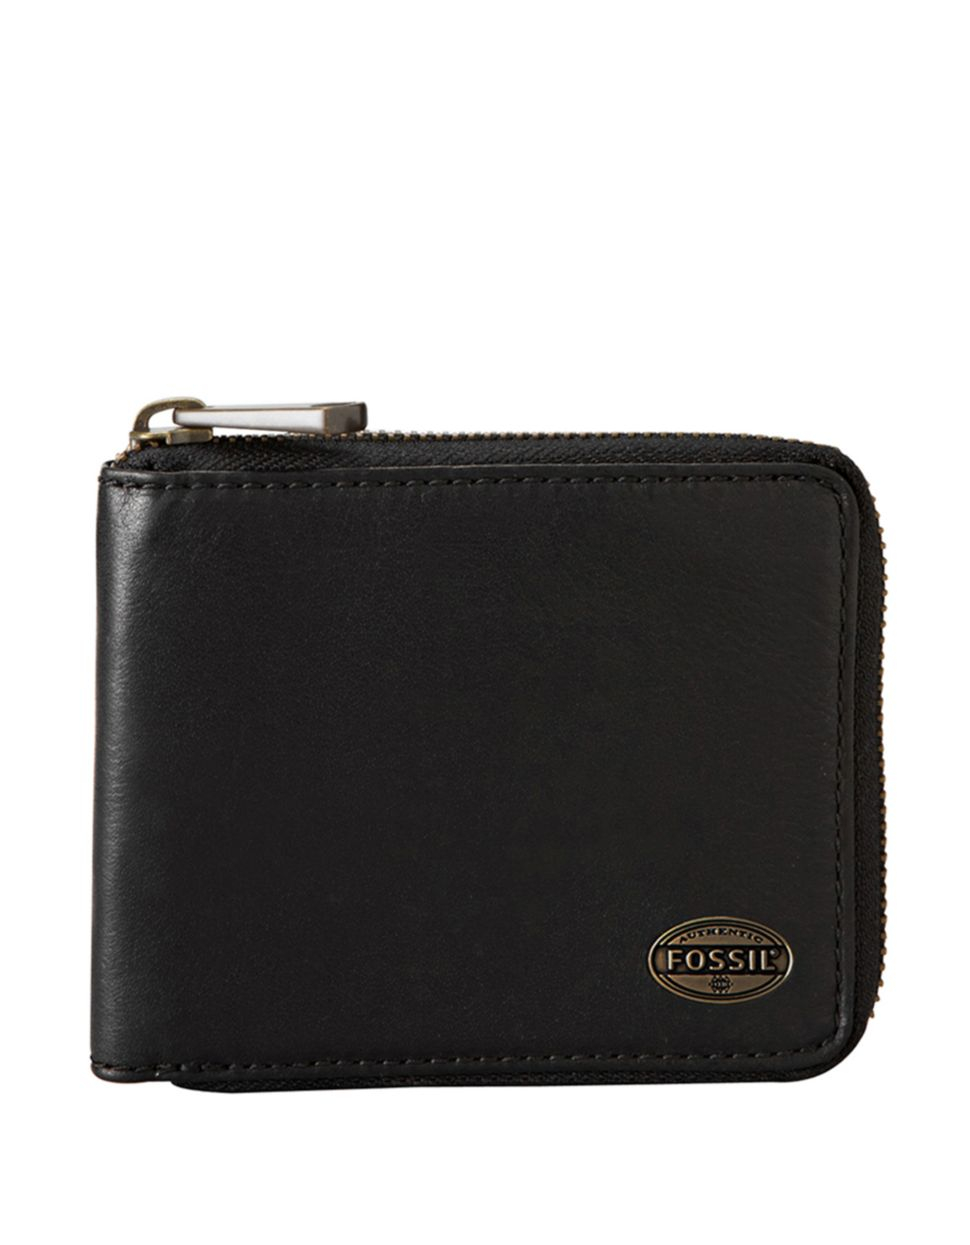 Fossil Leather Wallets For Men Iucn Water